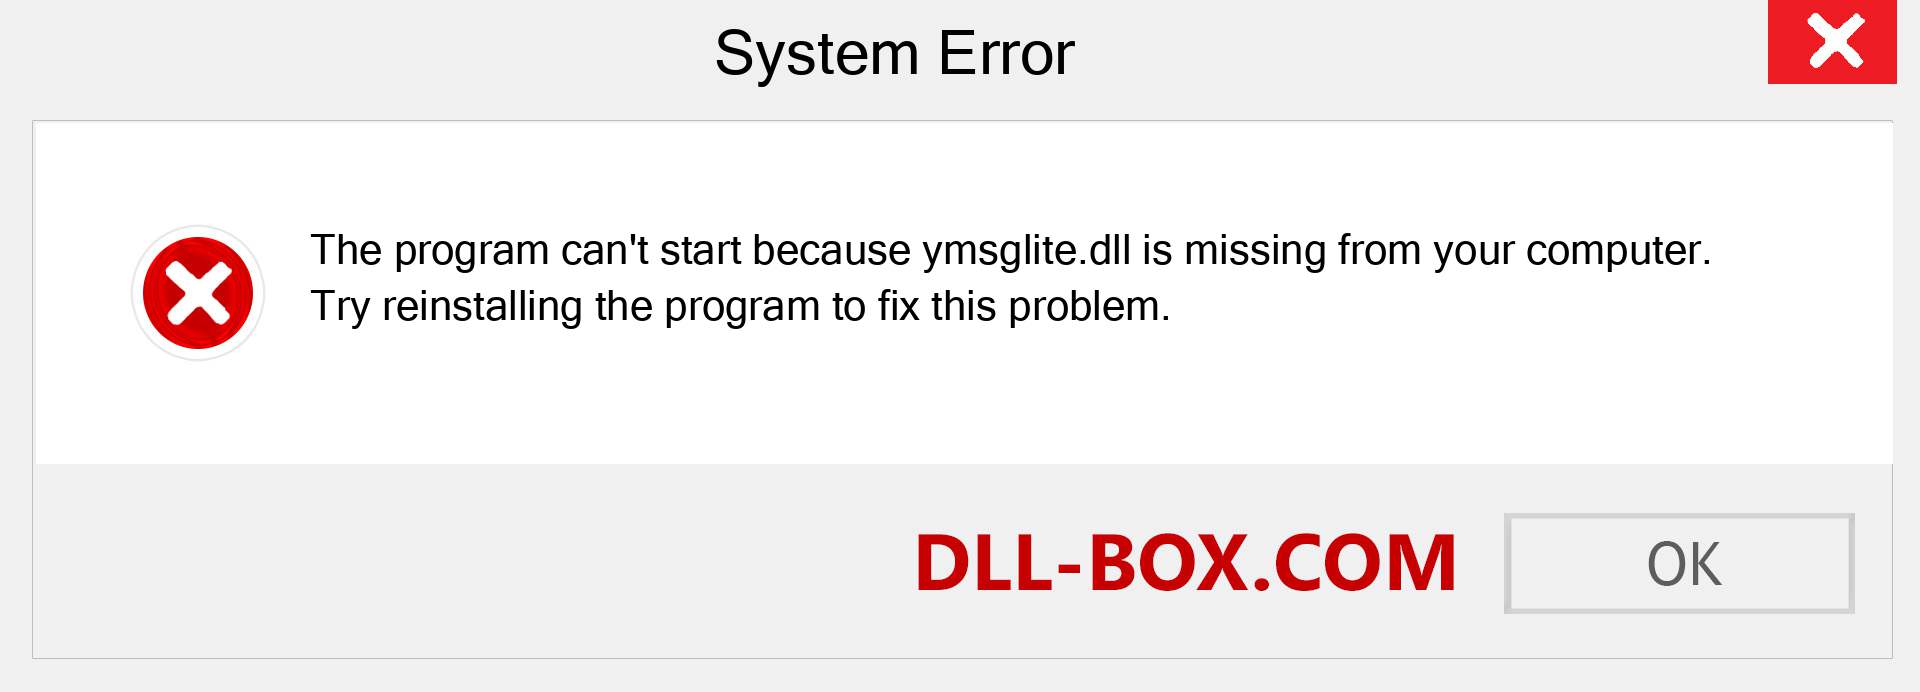  ymsglite.dll file is missing?. Download for Windows 7, 8, 10 - Fix  ymsglite dll Missing Error on Windows, photos, images